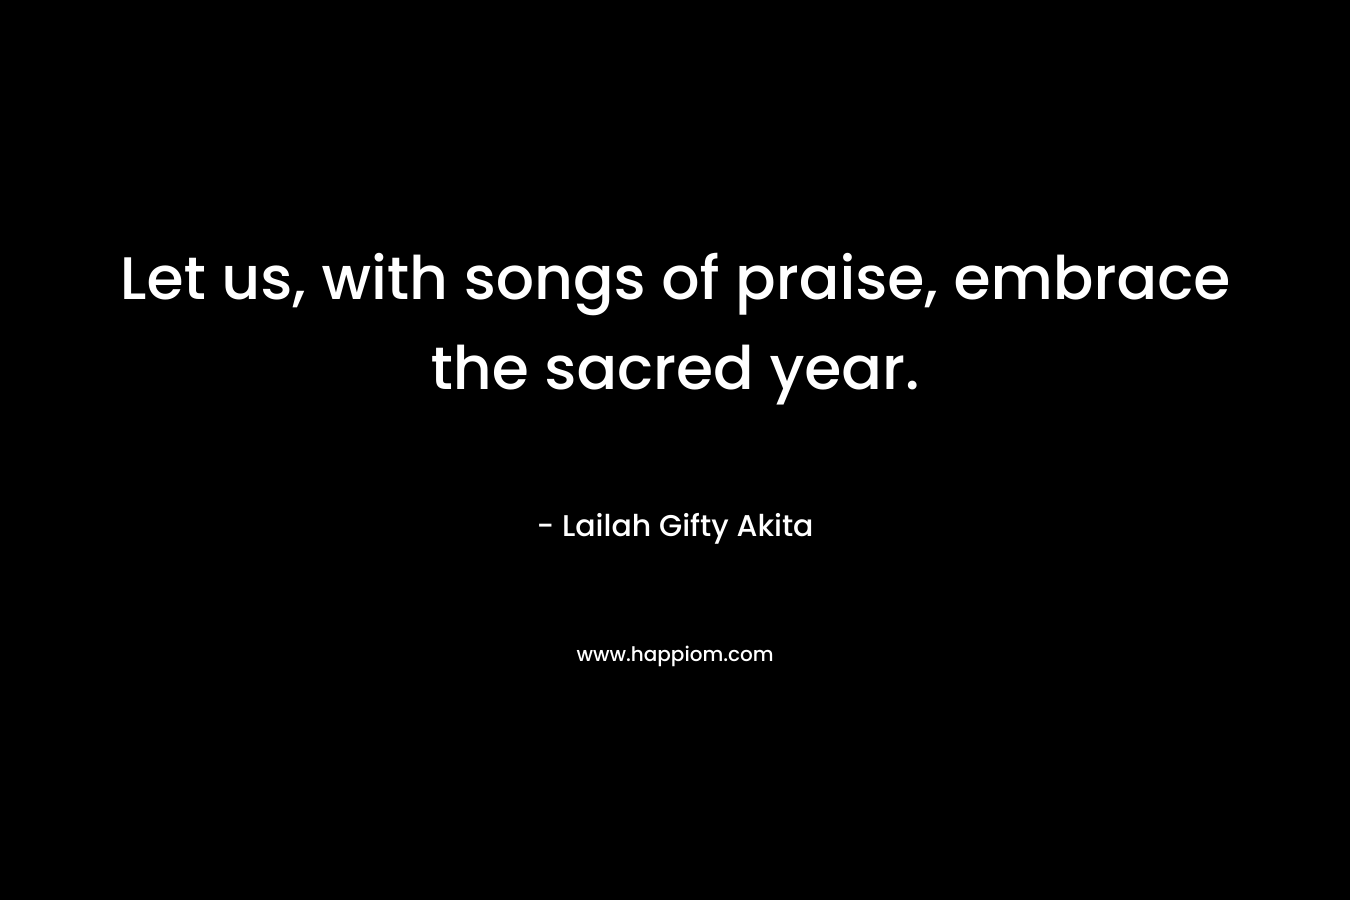 Let us, with songs of praise, embrace the sacred year.